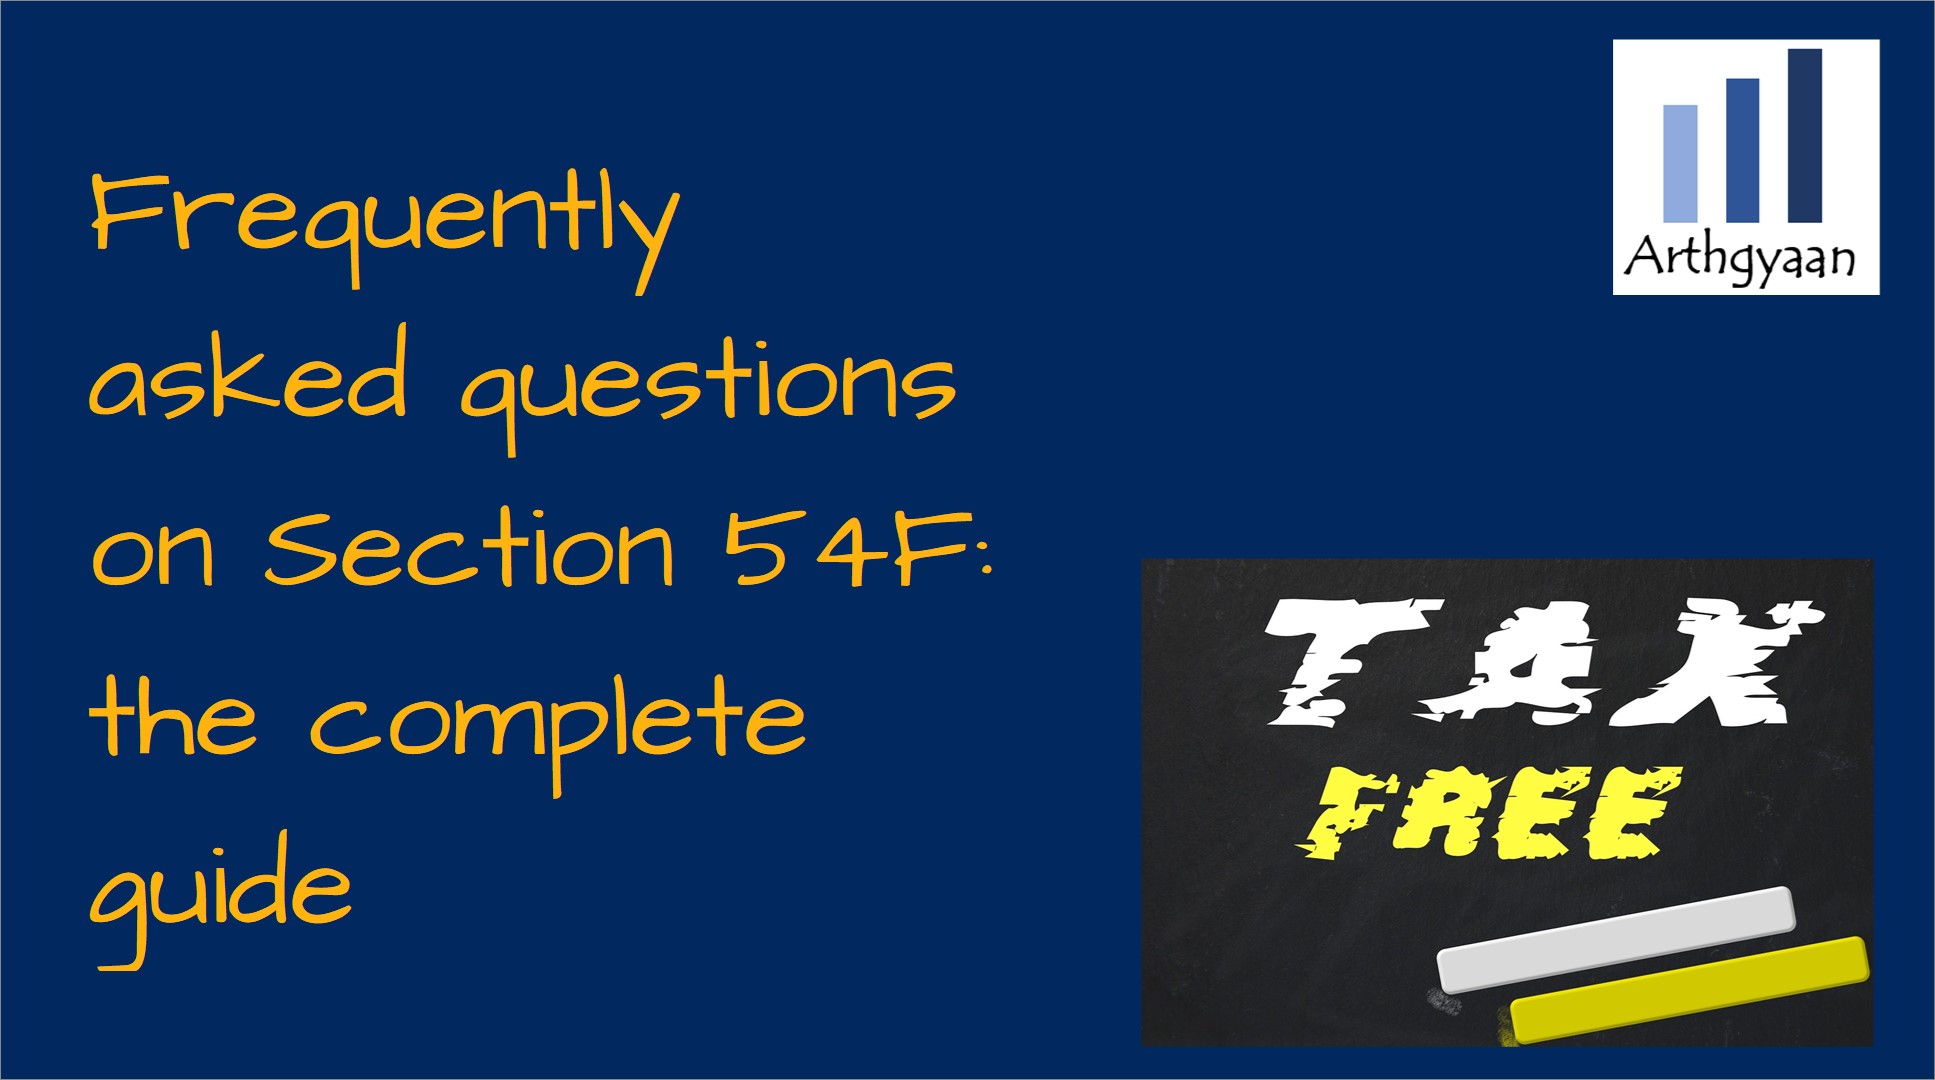 Frequently asked questions on Section 54F: the complete guide